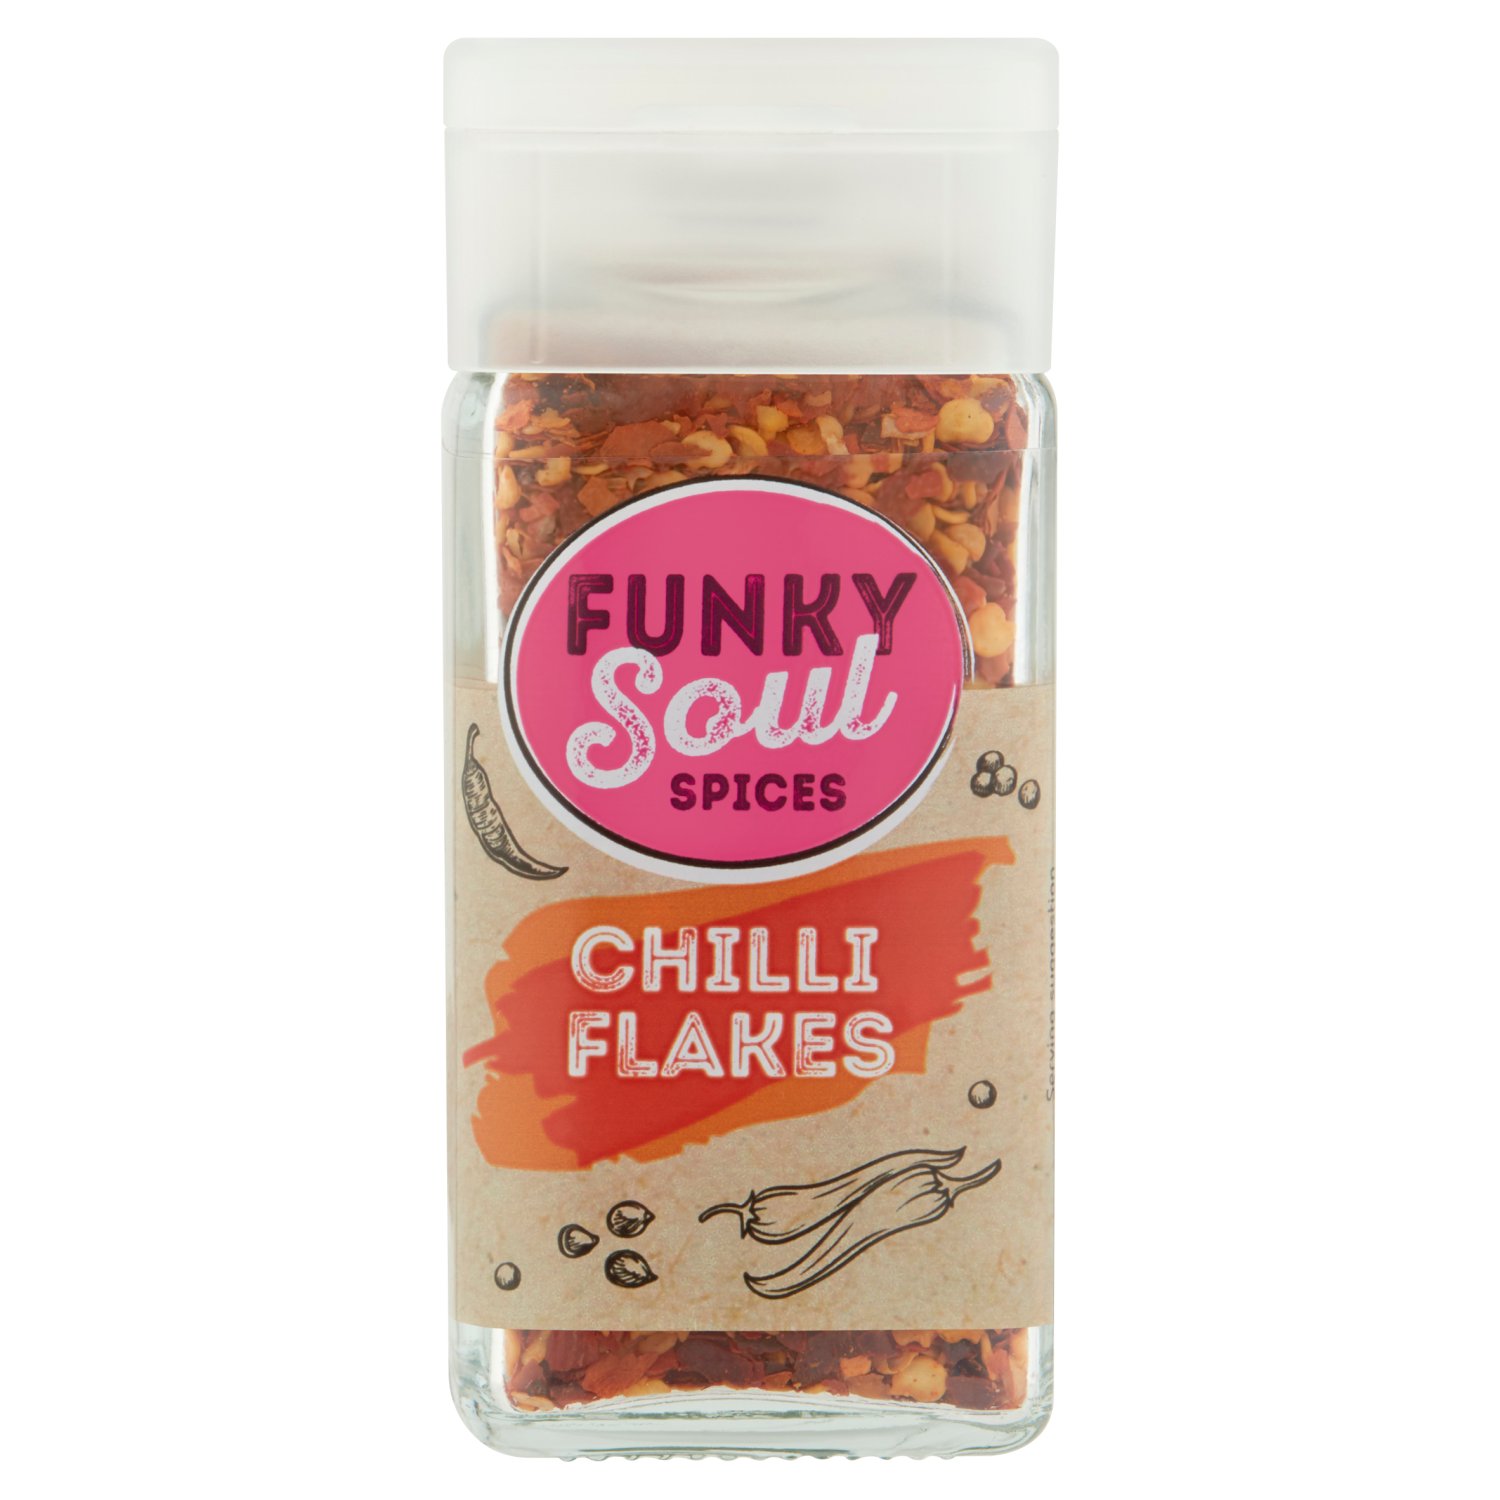 Funky Soul Chilli Flakes (26 g)